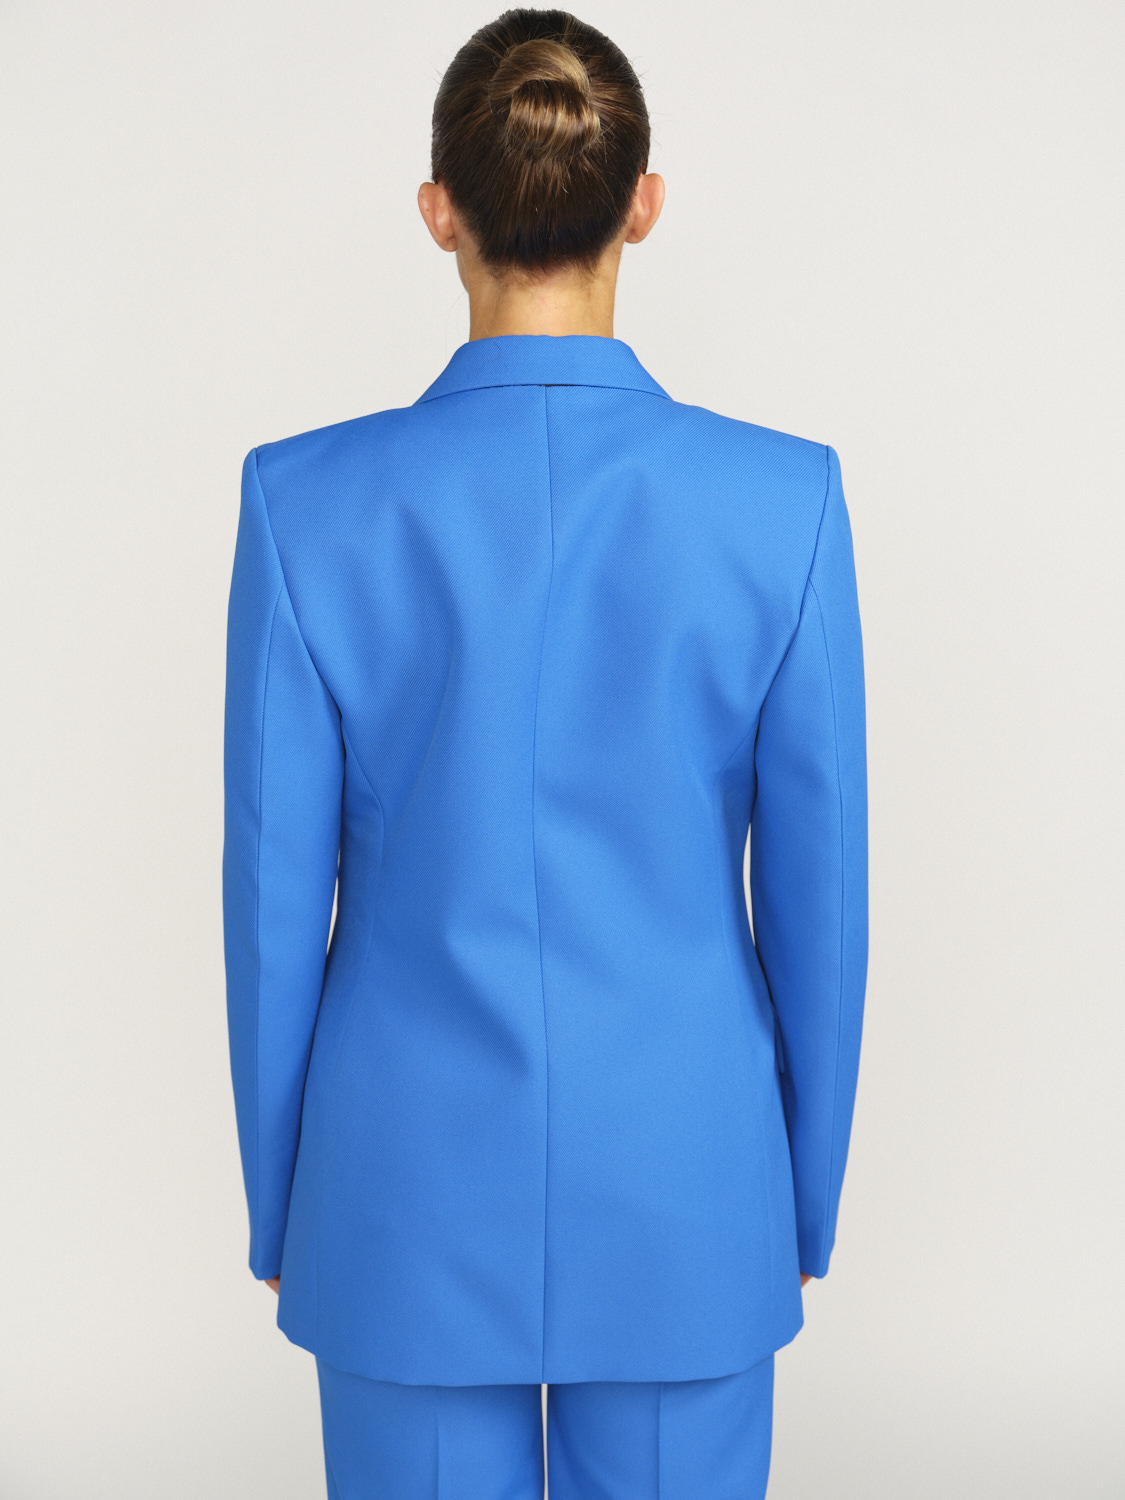 Victoria Beckham High Single Button Jacket - Single breasted blazer with patch pockets blue 36